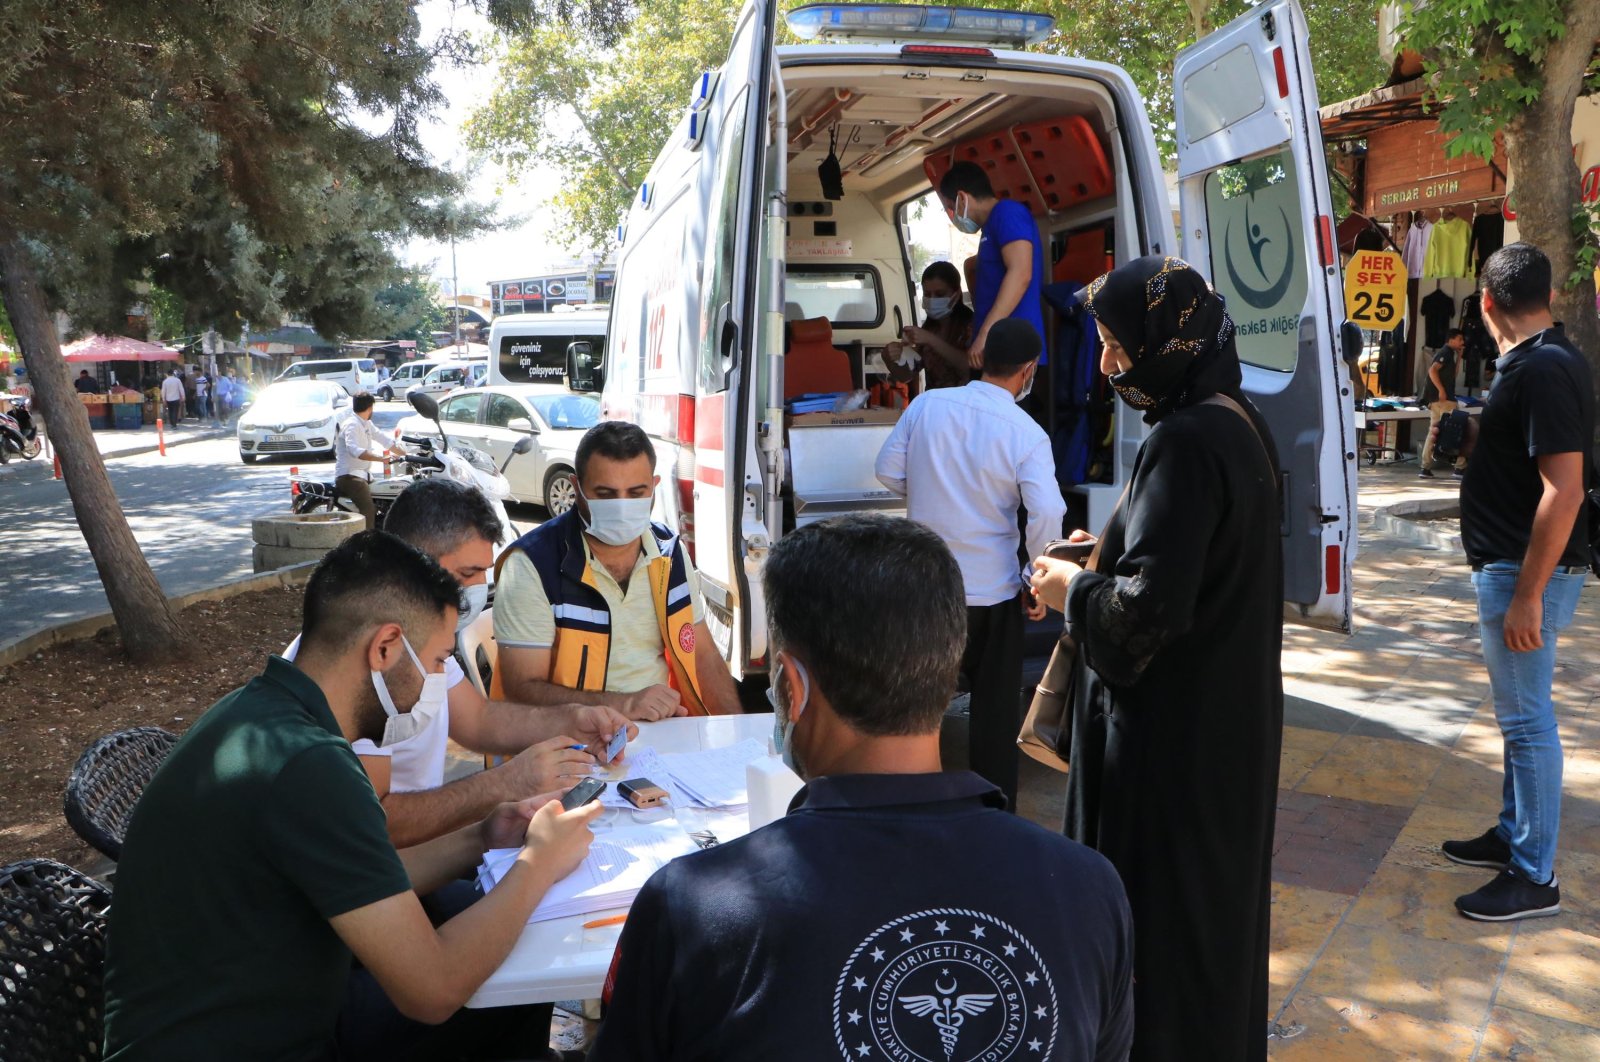 People wait for vaccination outside an ambulance turned into a mobile vaccination point in Şanlıurfa, southeastern Turkey, Sept. 24, 2021. (DHA Photo)